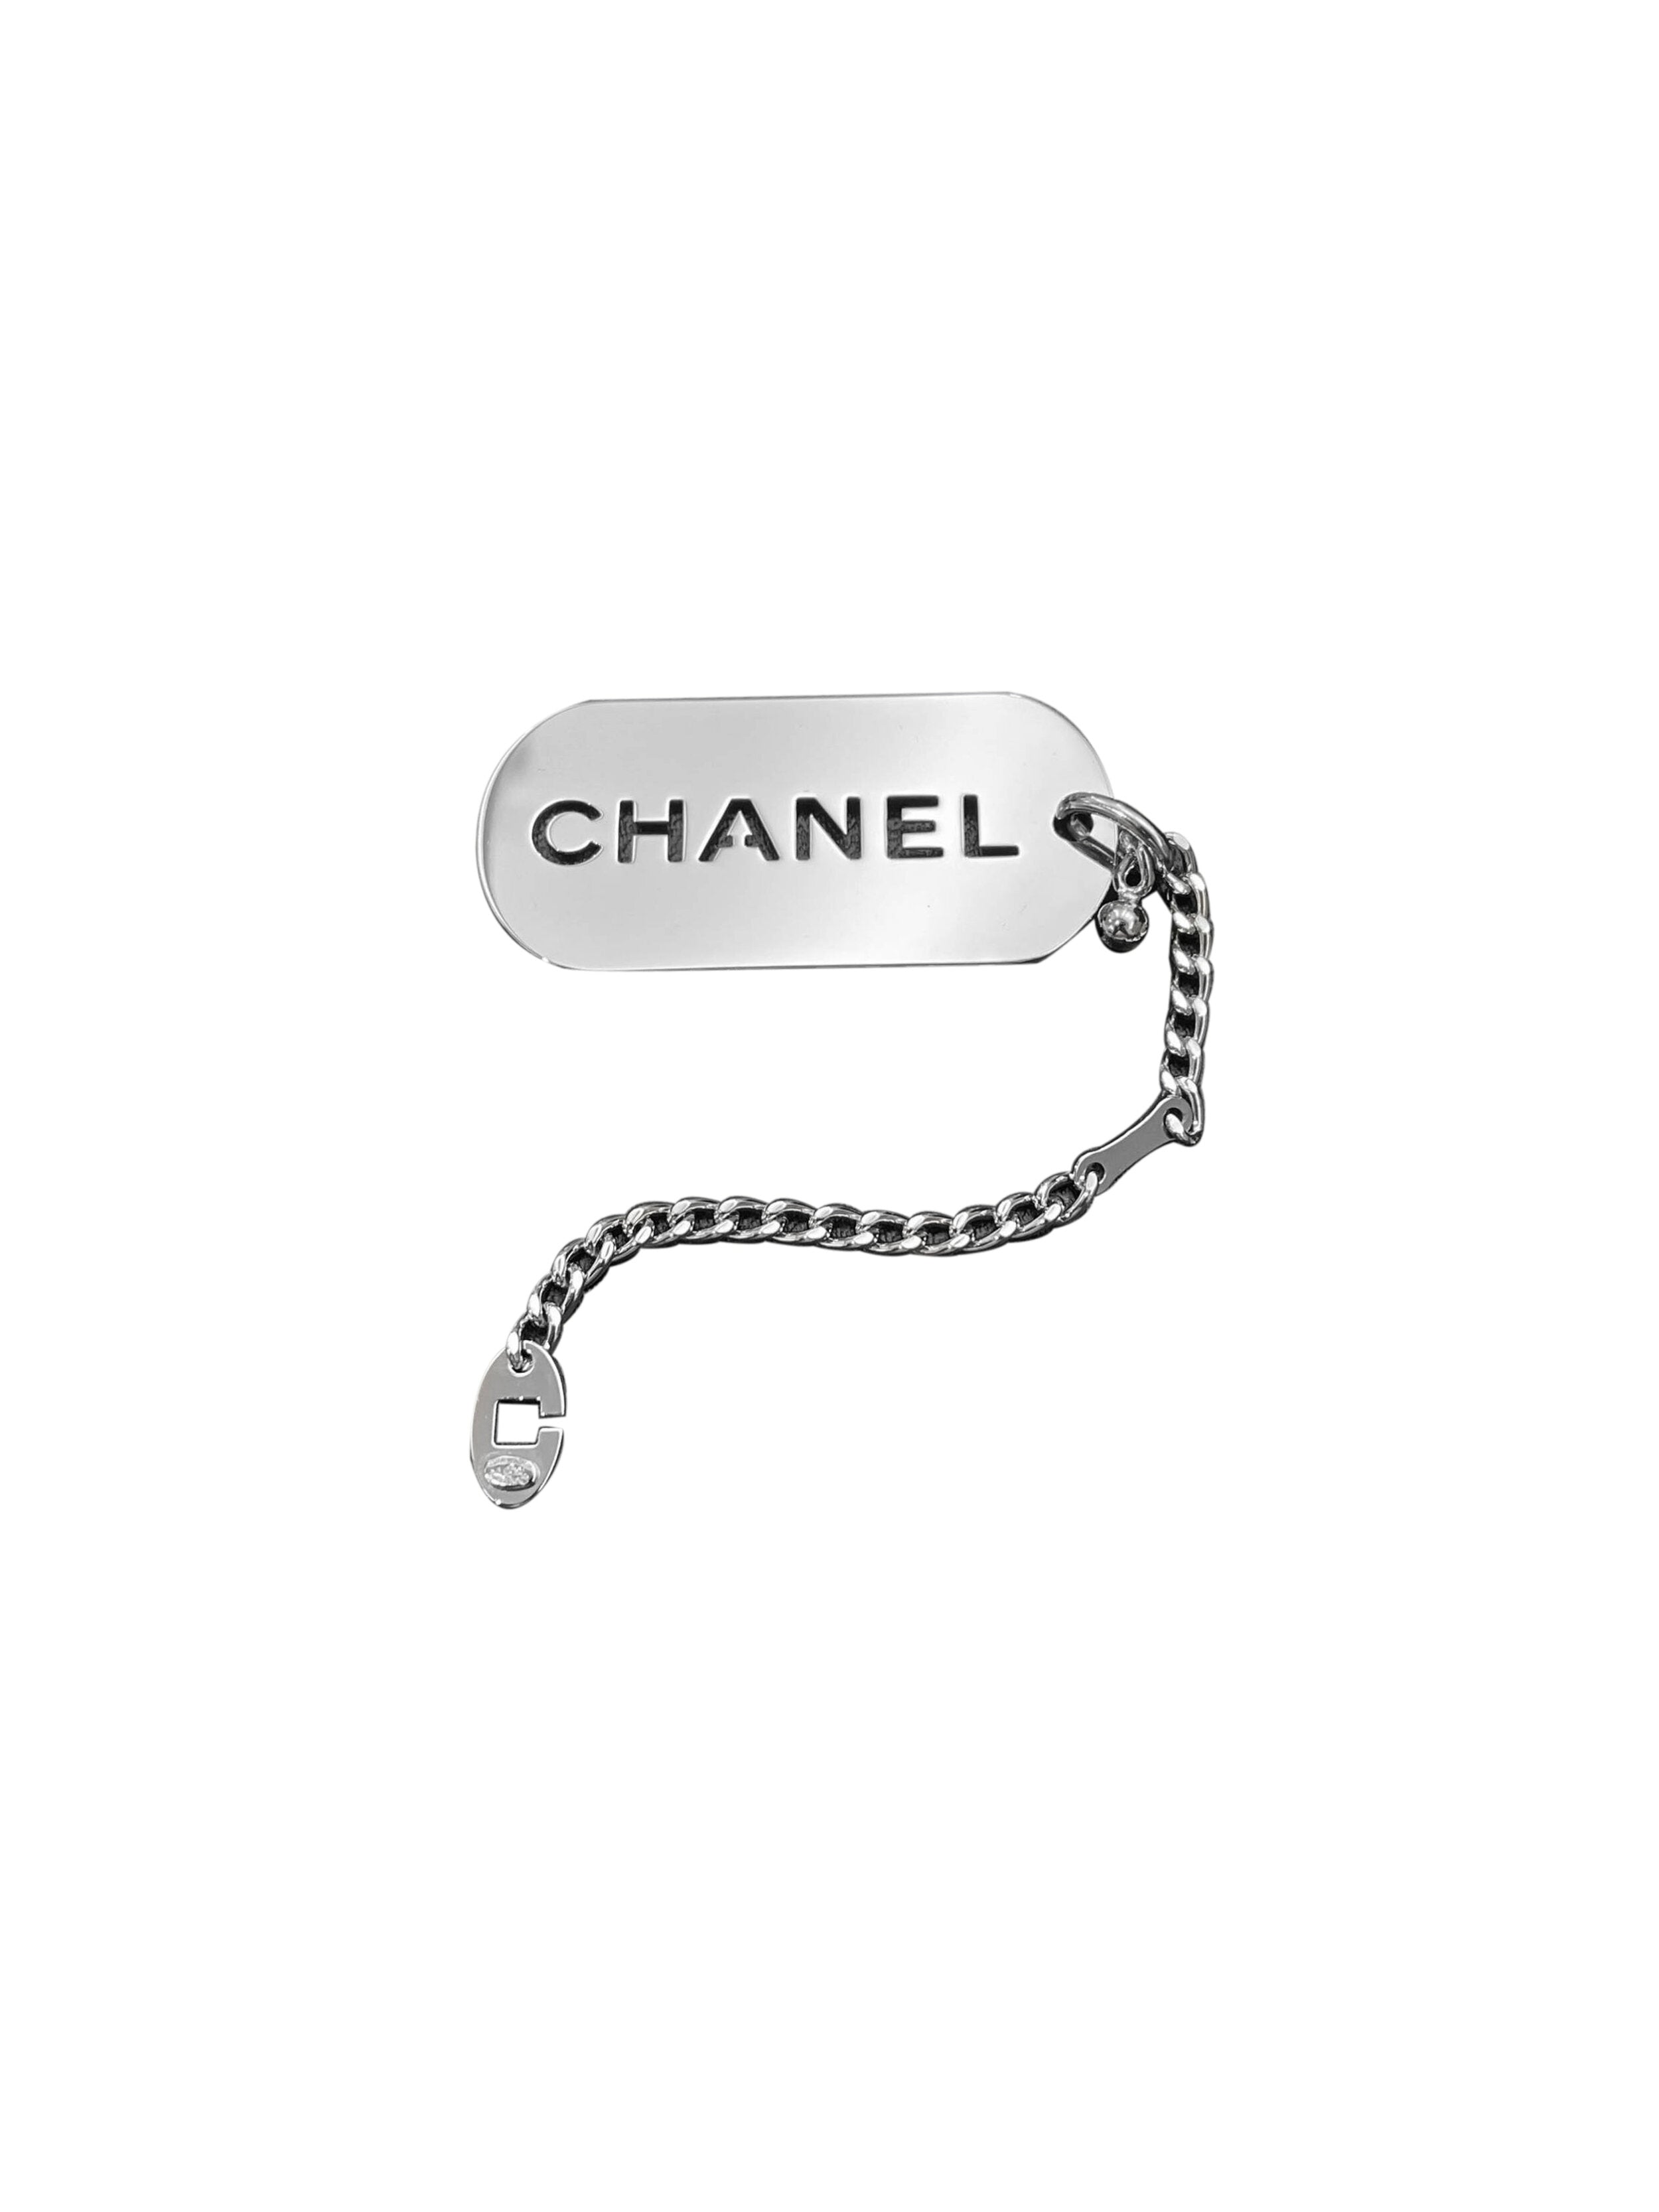 CHANEL, Accessories, Chanel Keychain In Silver Metal